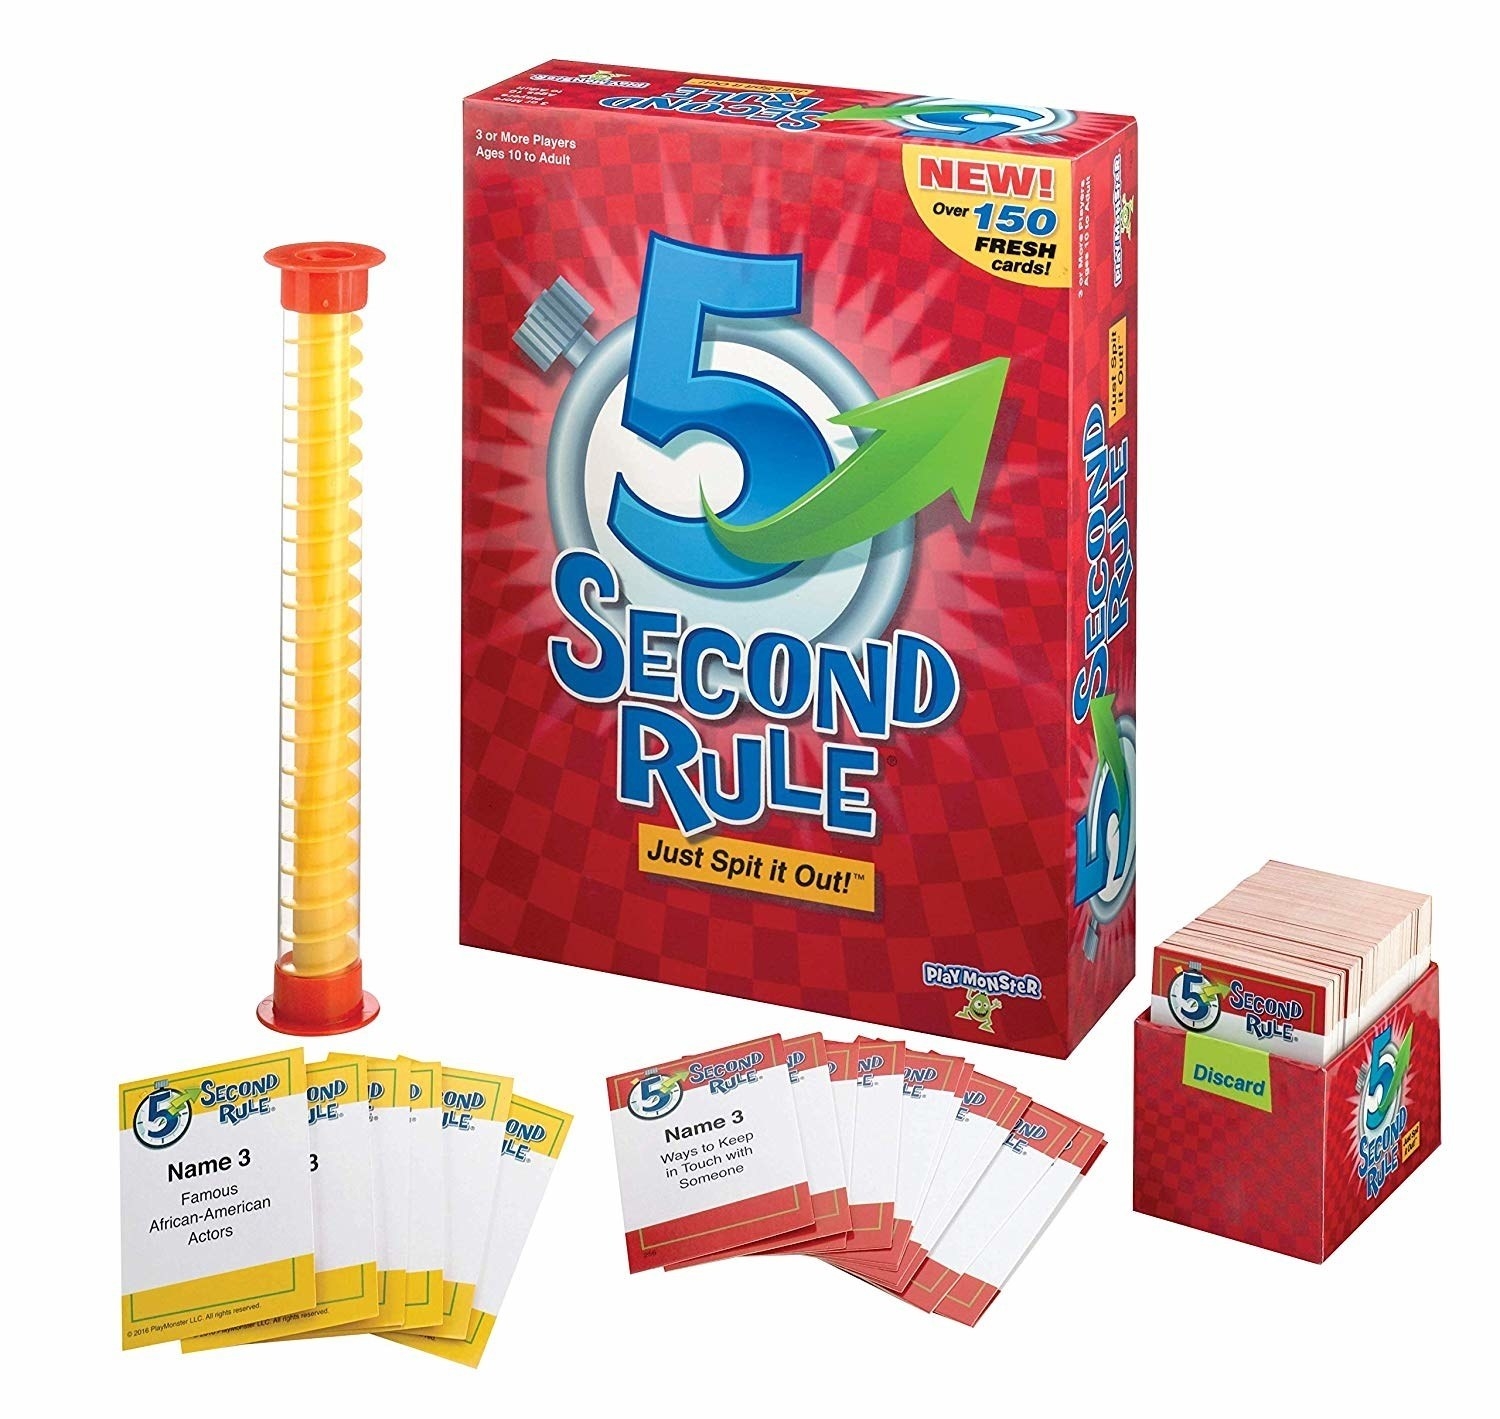 The game box, yellow tower timer, and red and yellow cards